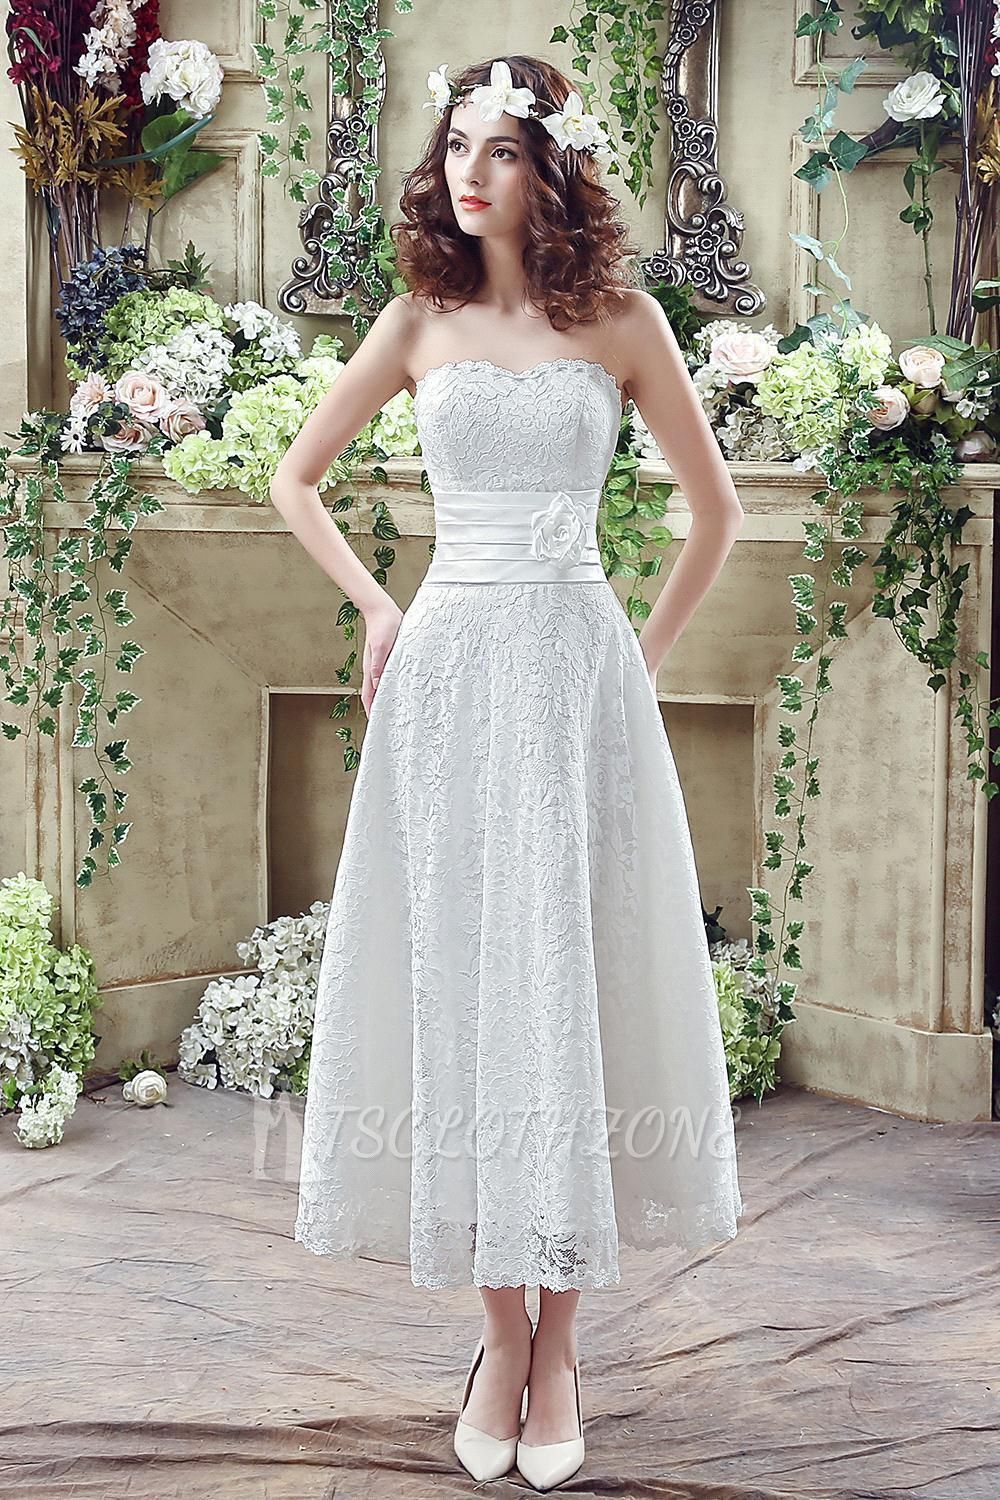 Elegant Sweetheart Lace Wedding Dress Ankle Length Empire 2022 Bridal Gown